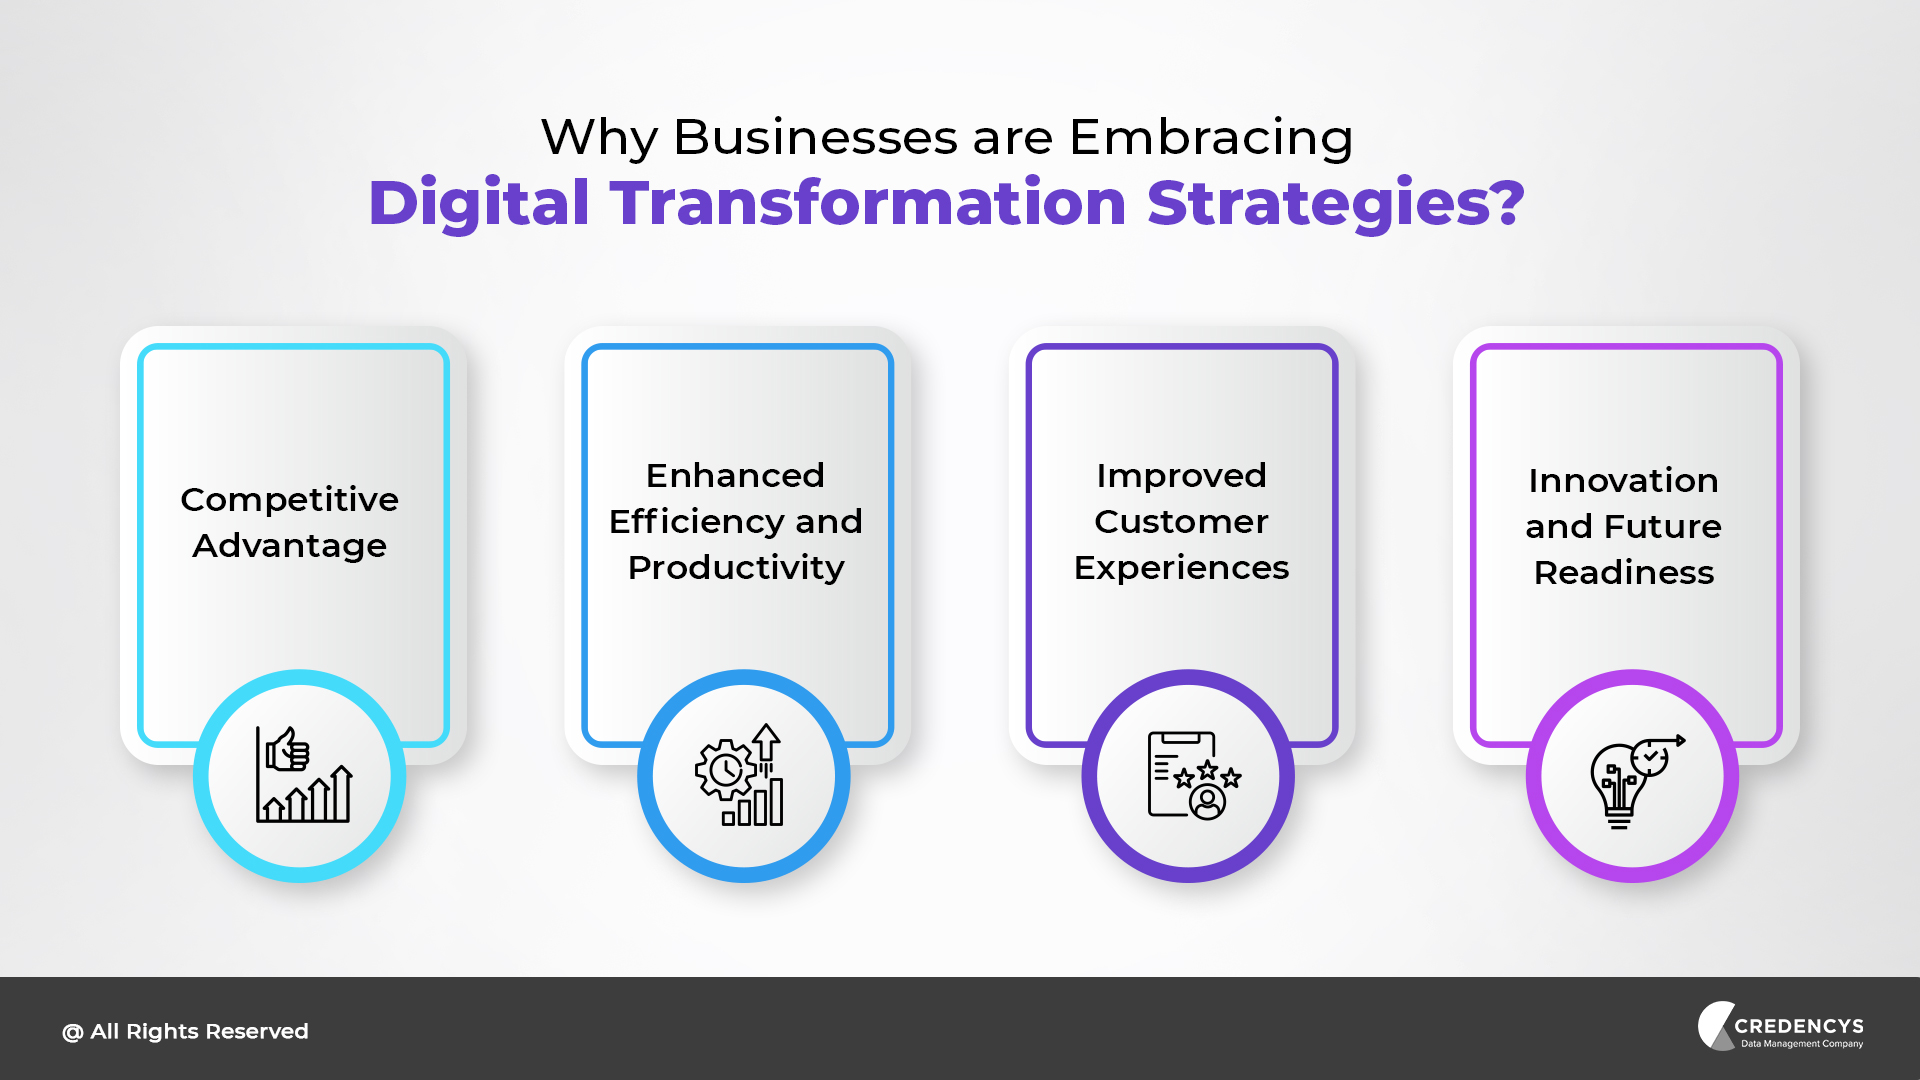 Why Businesses are Embracing Digital Transformation Strategies